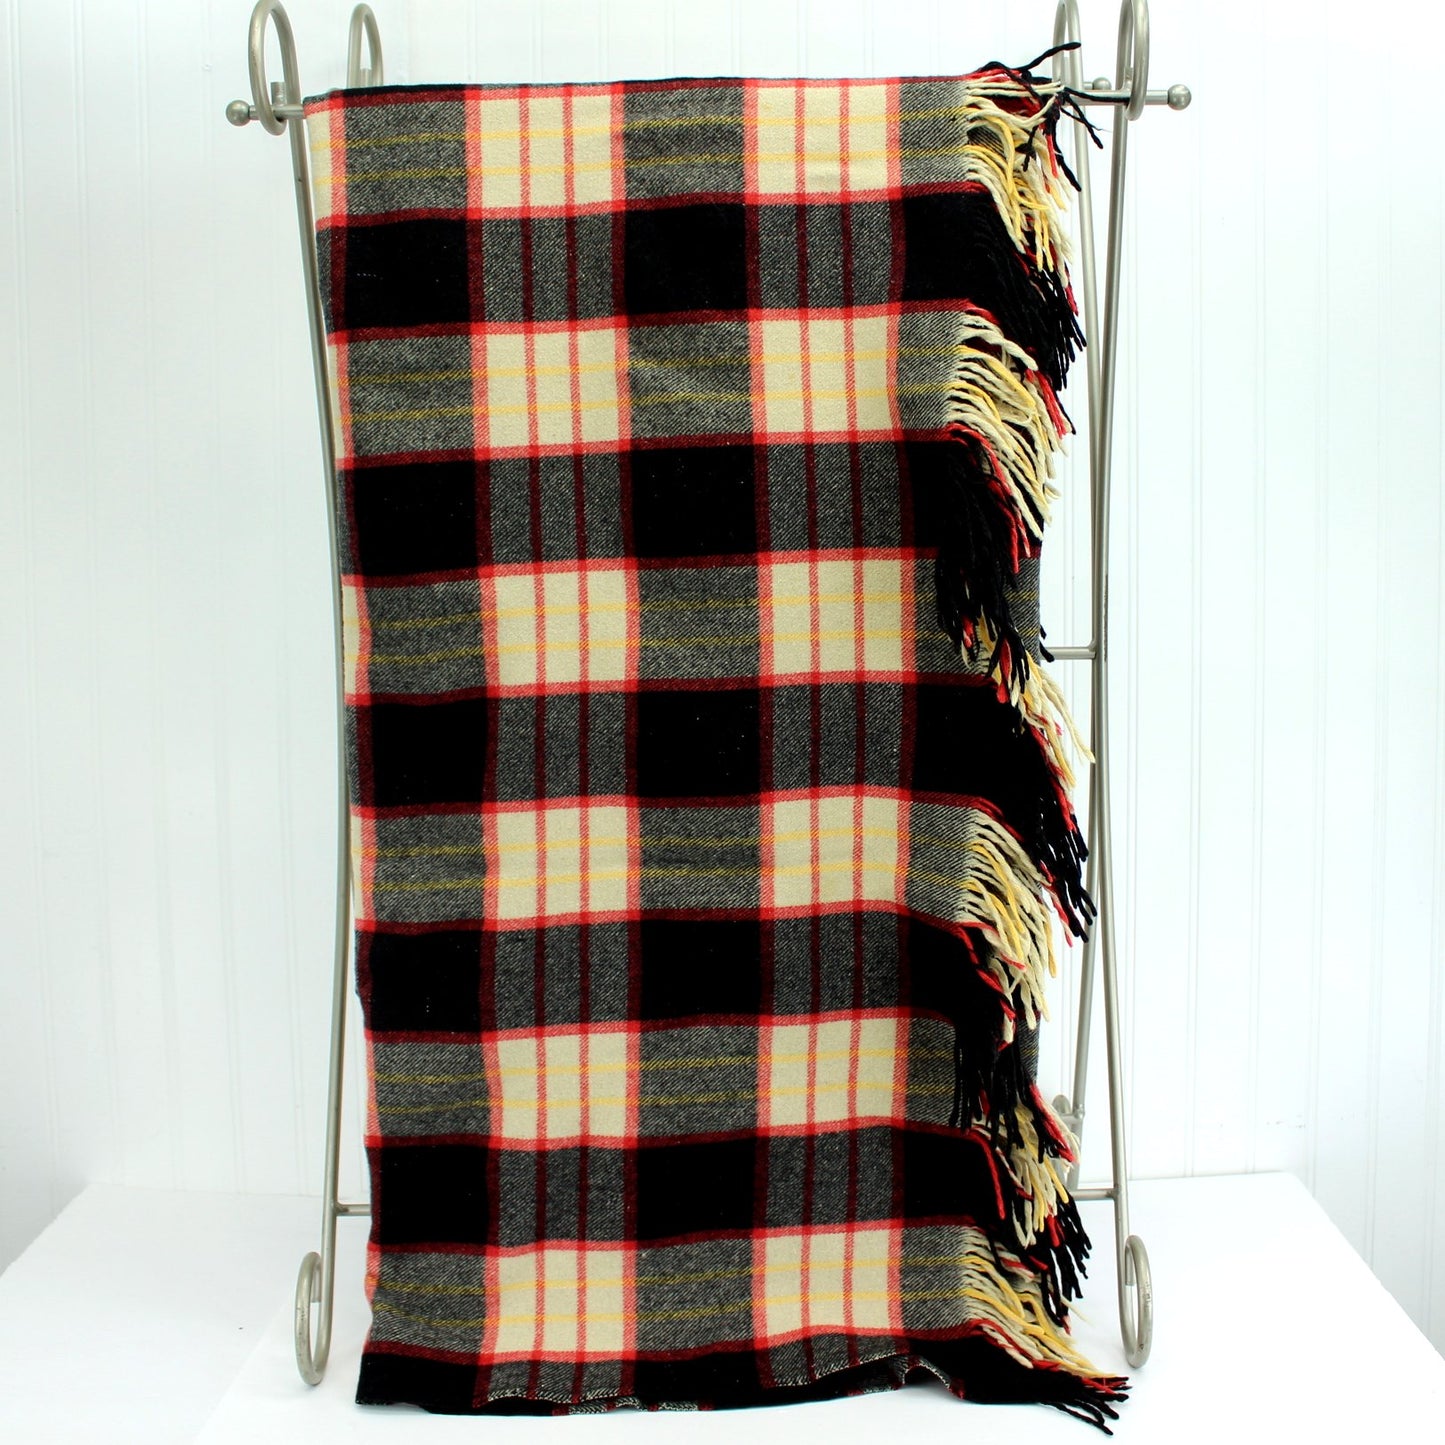 "Mister" Fringed Estate Throw Blanket Plaid Cream Red Back Yellow Fine Wool view of pattern